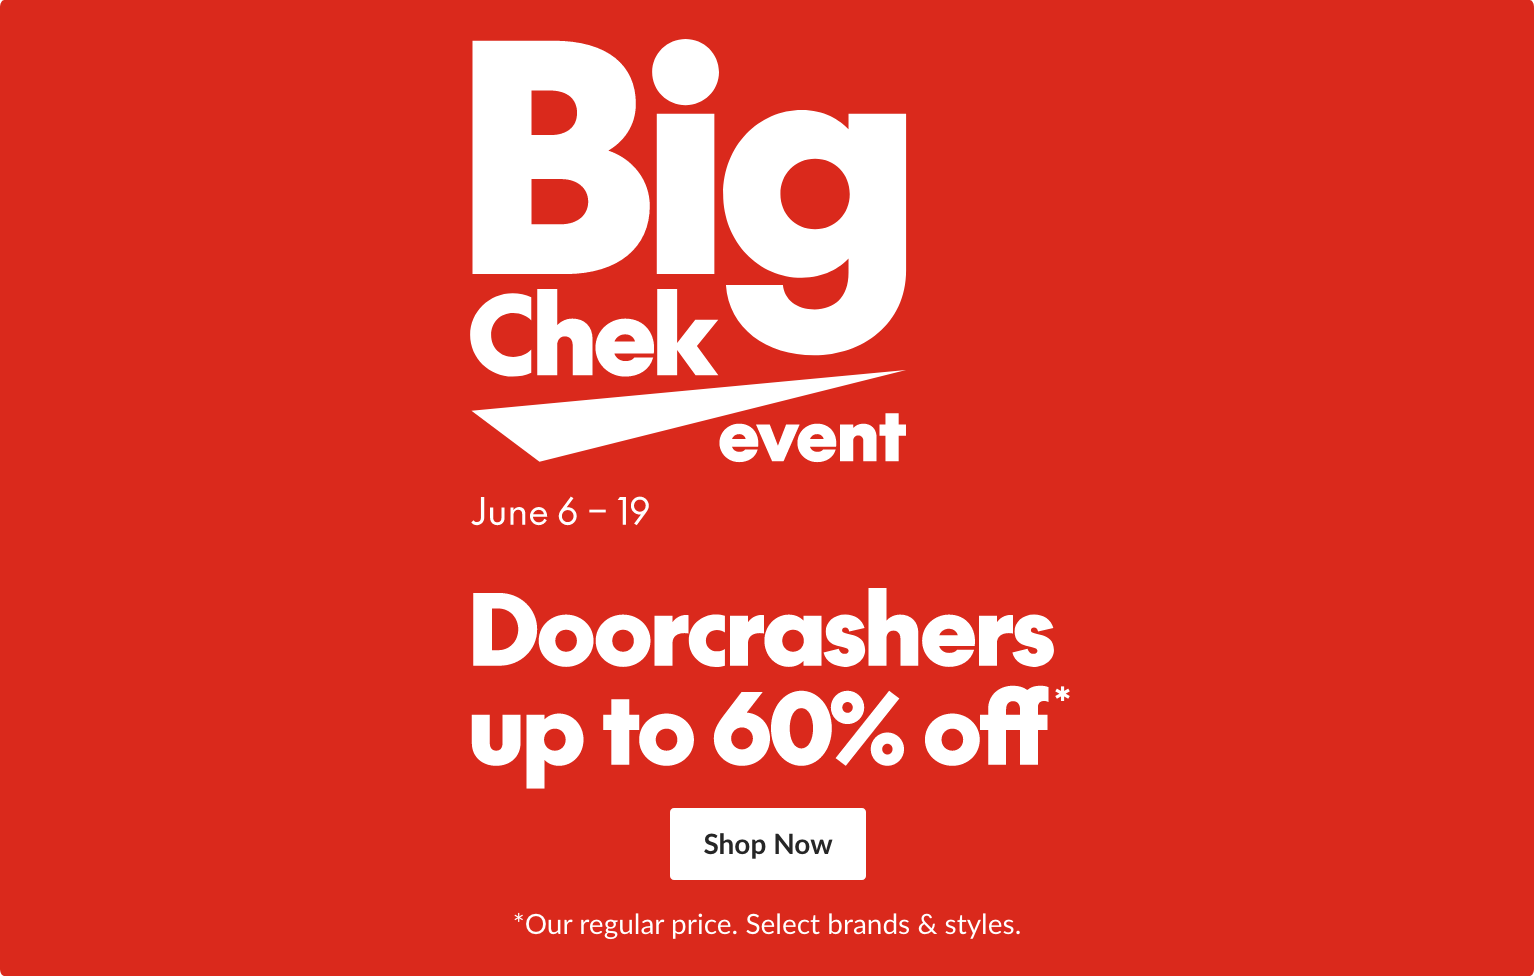 Big Chek Event, doorcrashers up to 60% off our regular price. Select brands & styles.